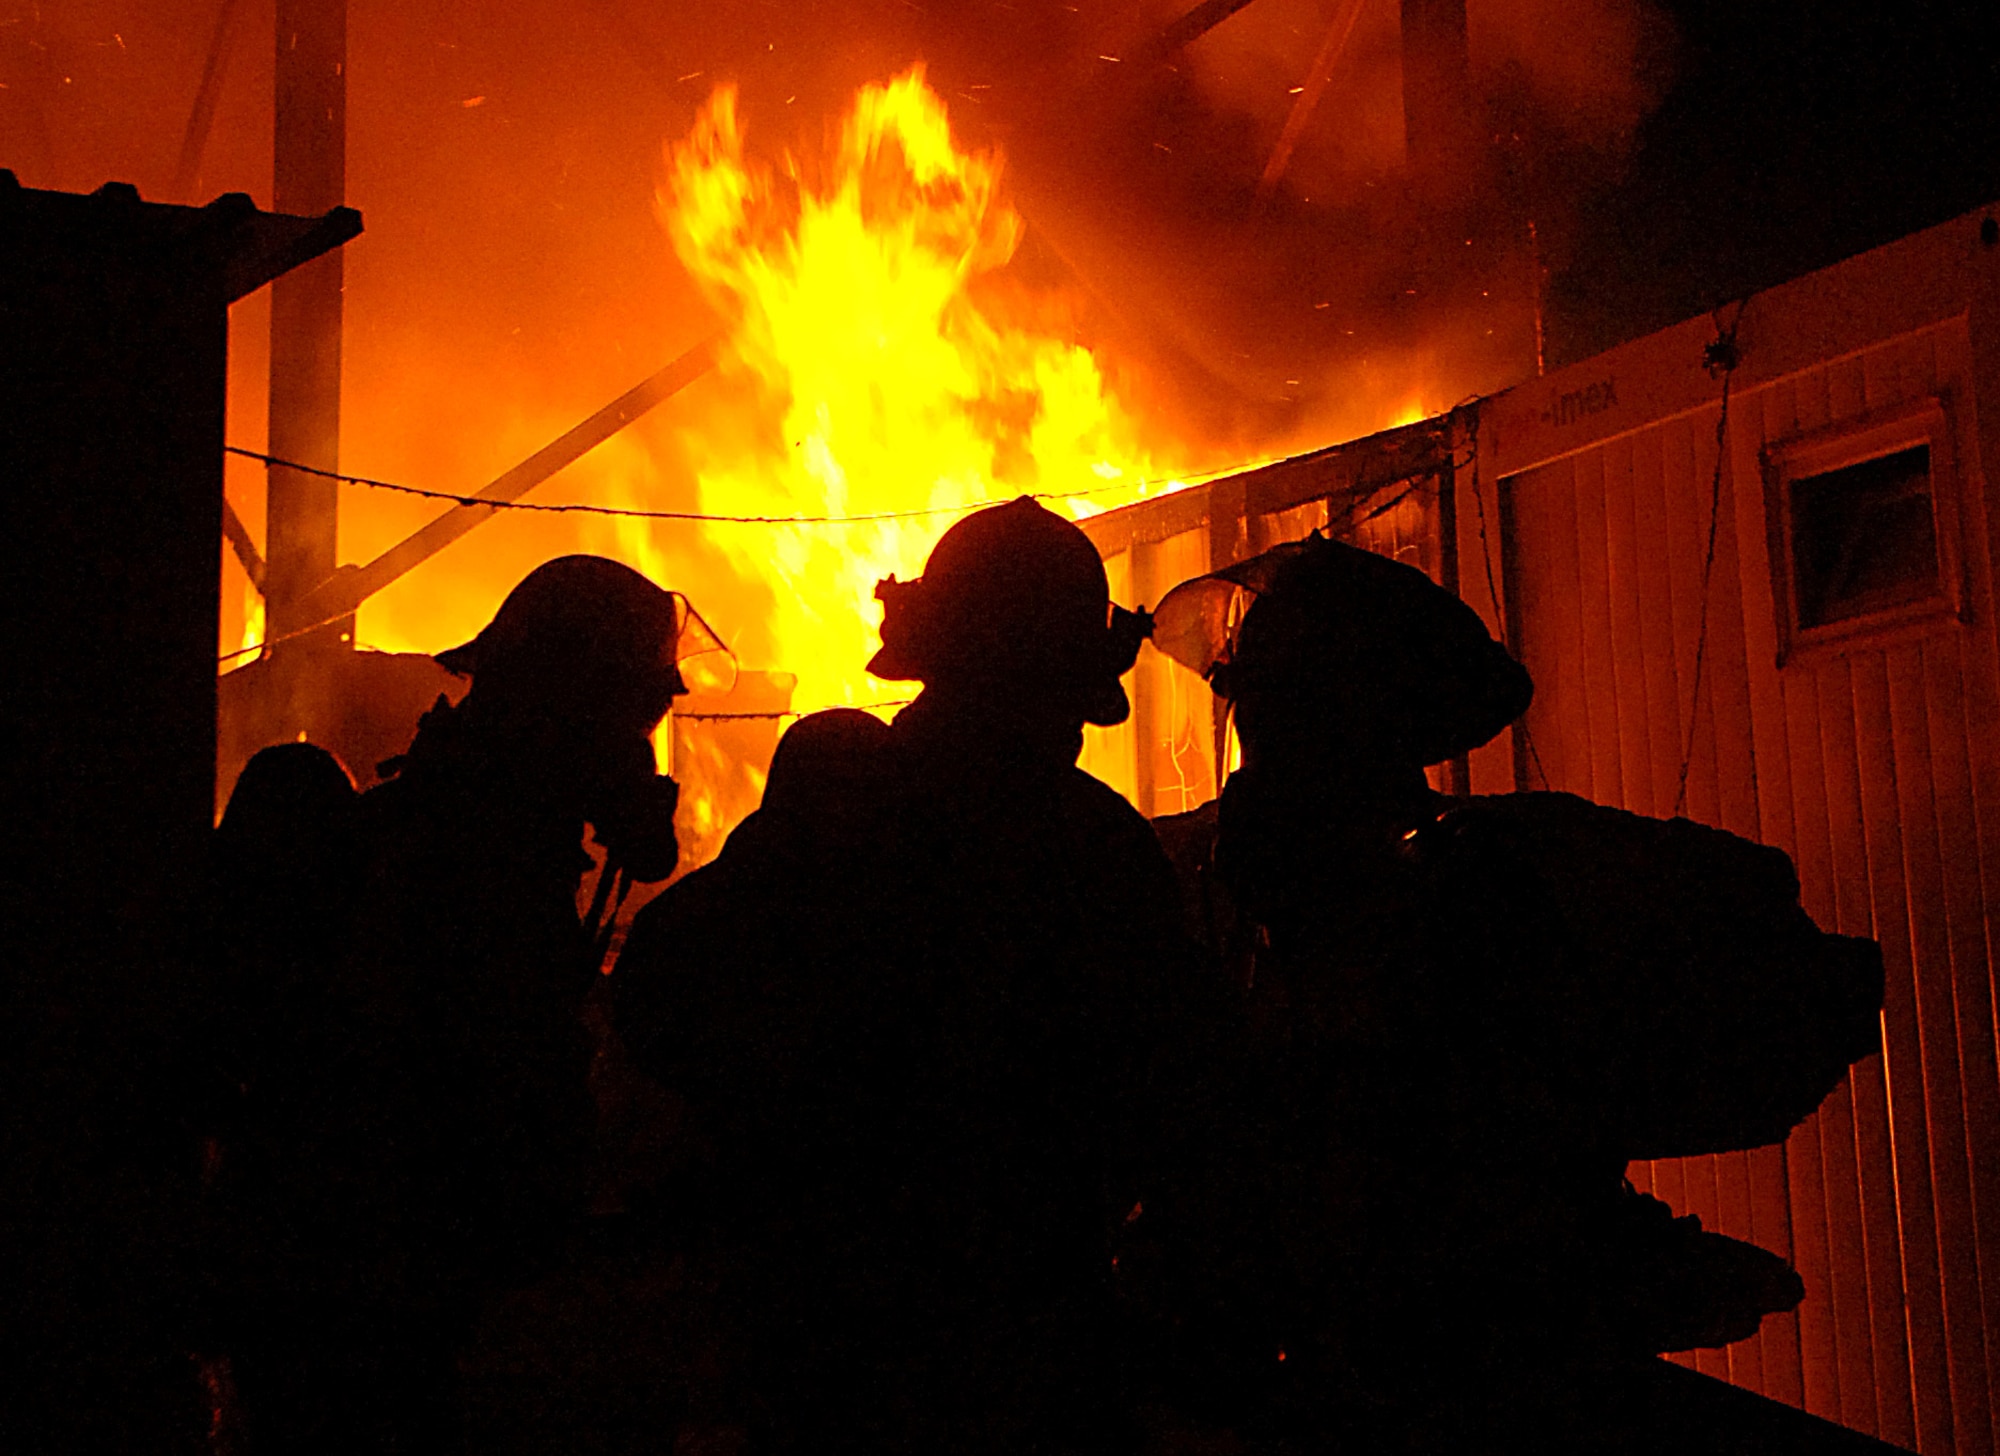 Firefighters from contractor Wackenhut Fire and Emergency Service battle a fire at Forward Operating Base Marez in Mosul, Iraq, on Thursday, June 8. The fire was at a local restaurant and jewelry store. (U.S. Air Force photo/Tech. Sgt. Jeremy T. Lock)
